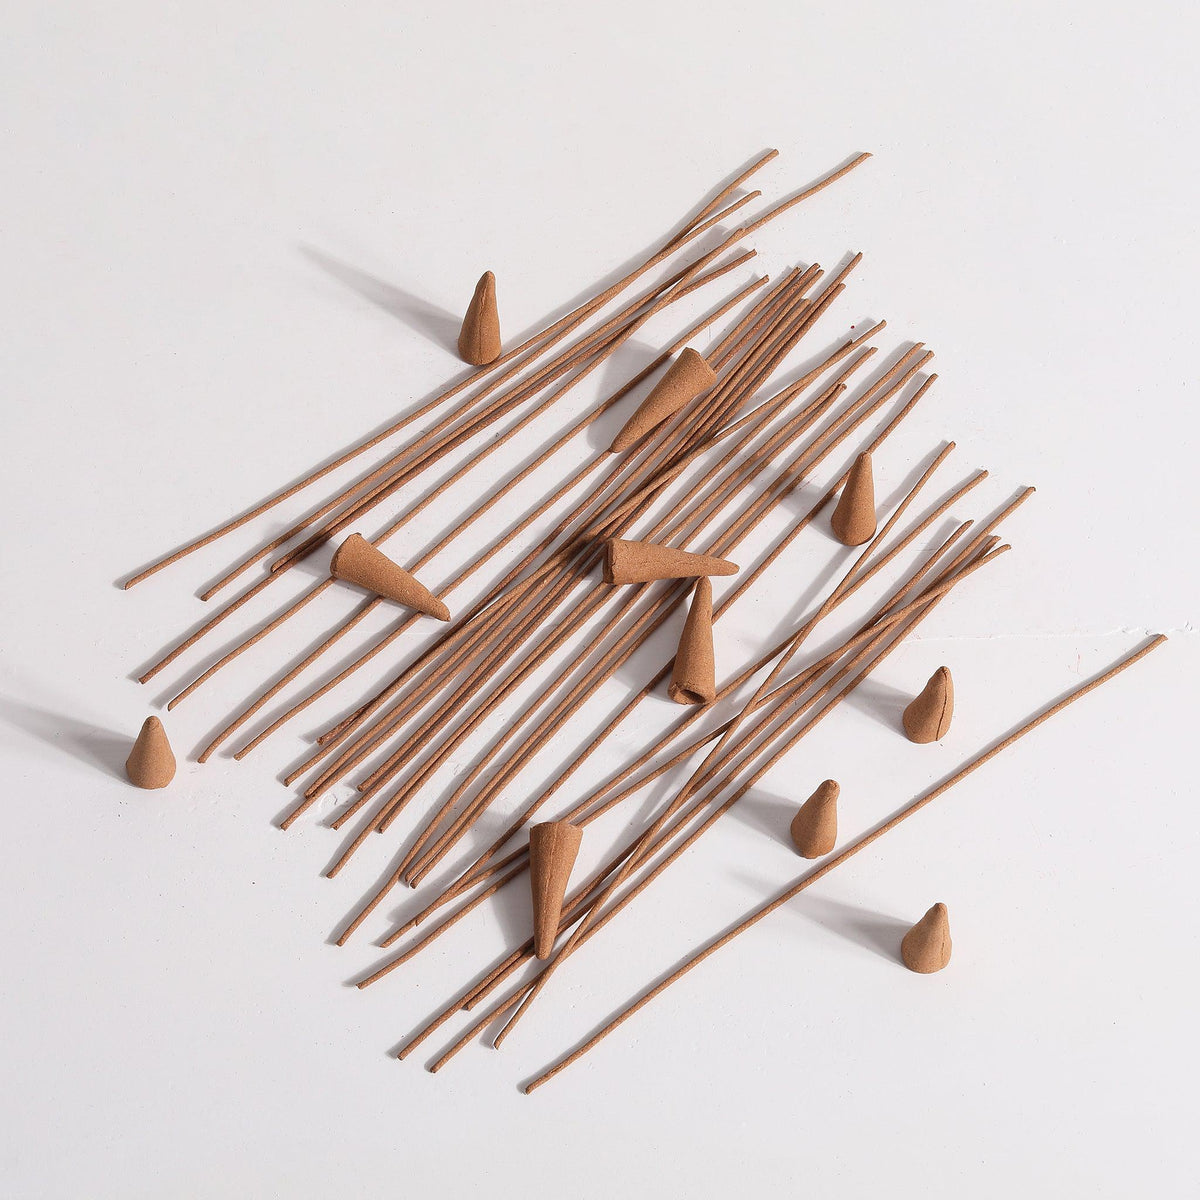 Handmade Incense sticks &amp; cones by Kin Objects Evening Stroll -